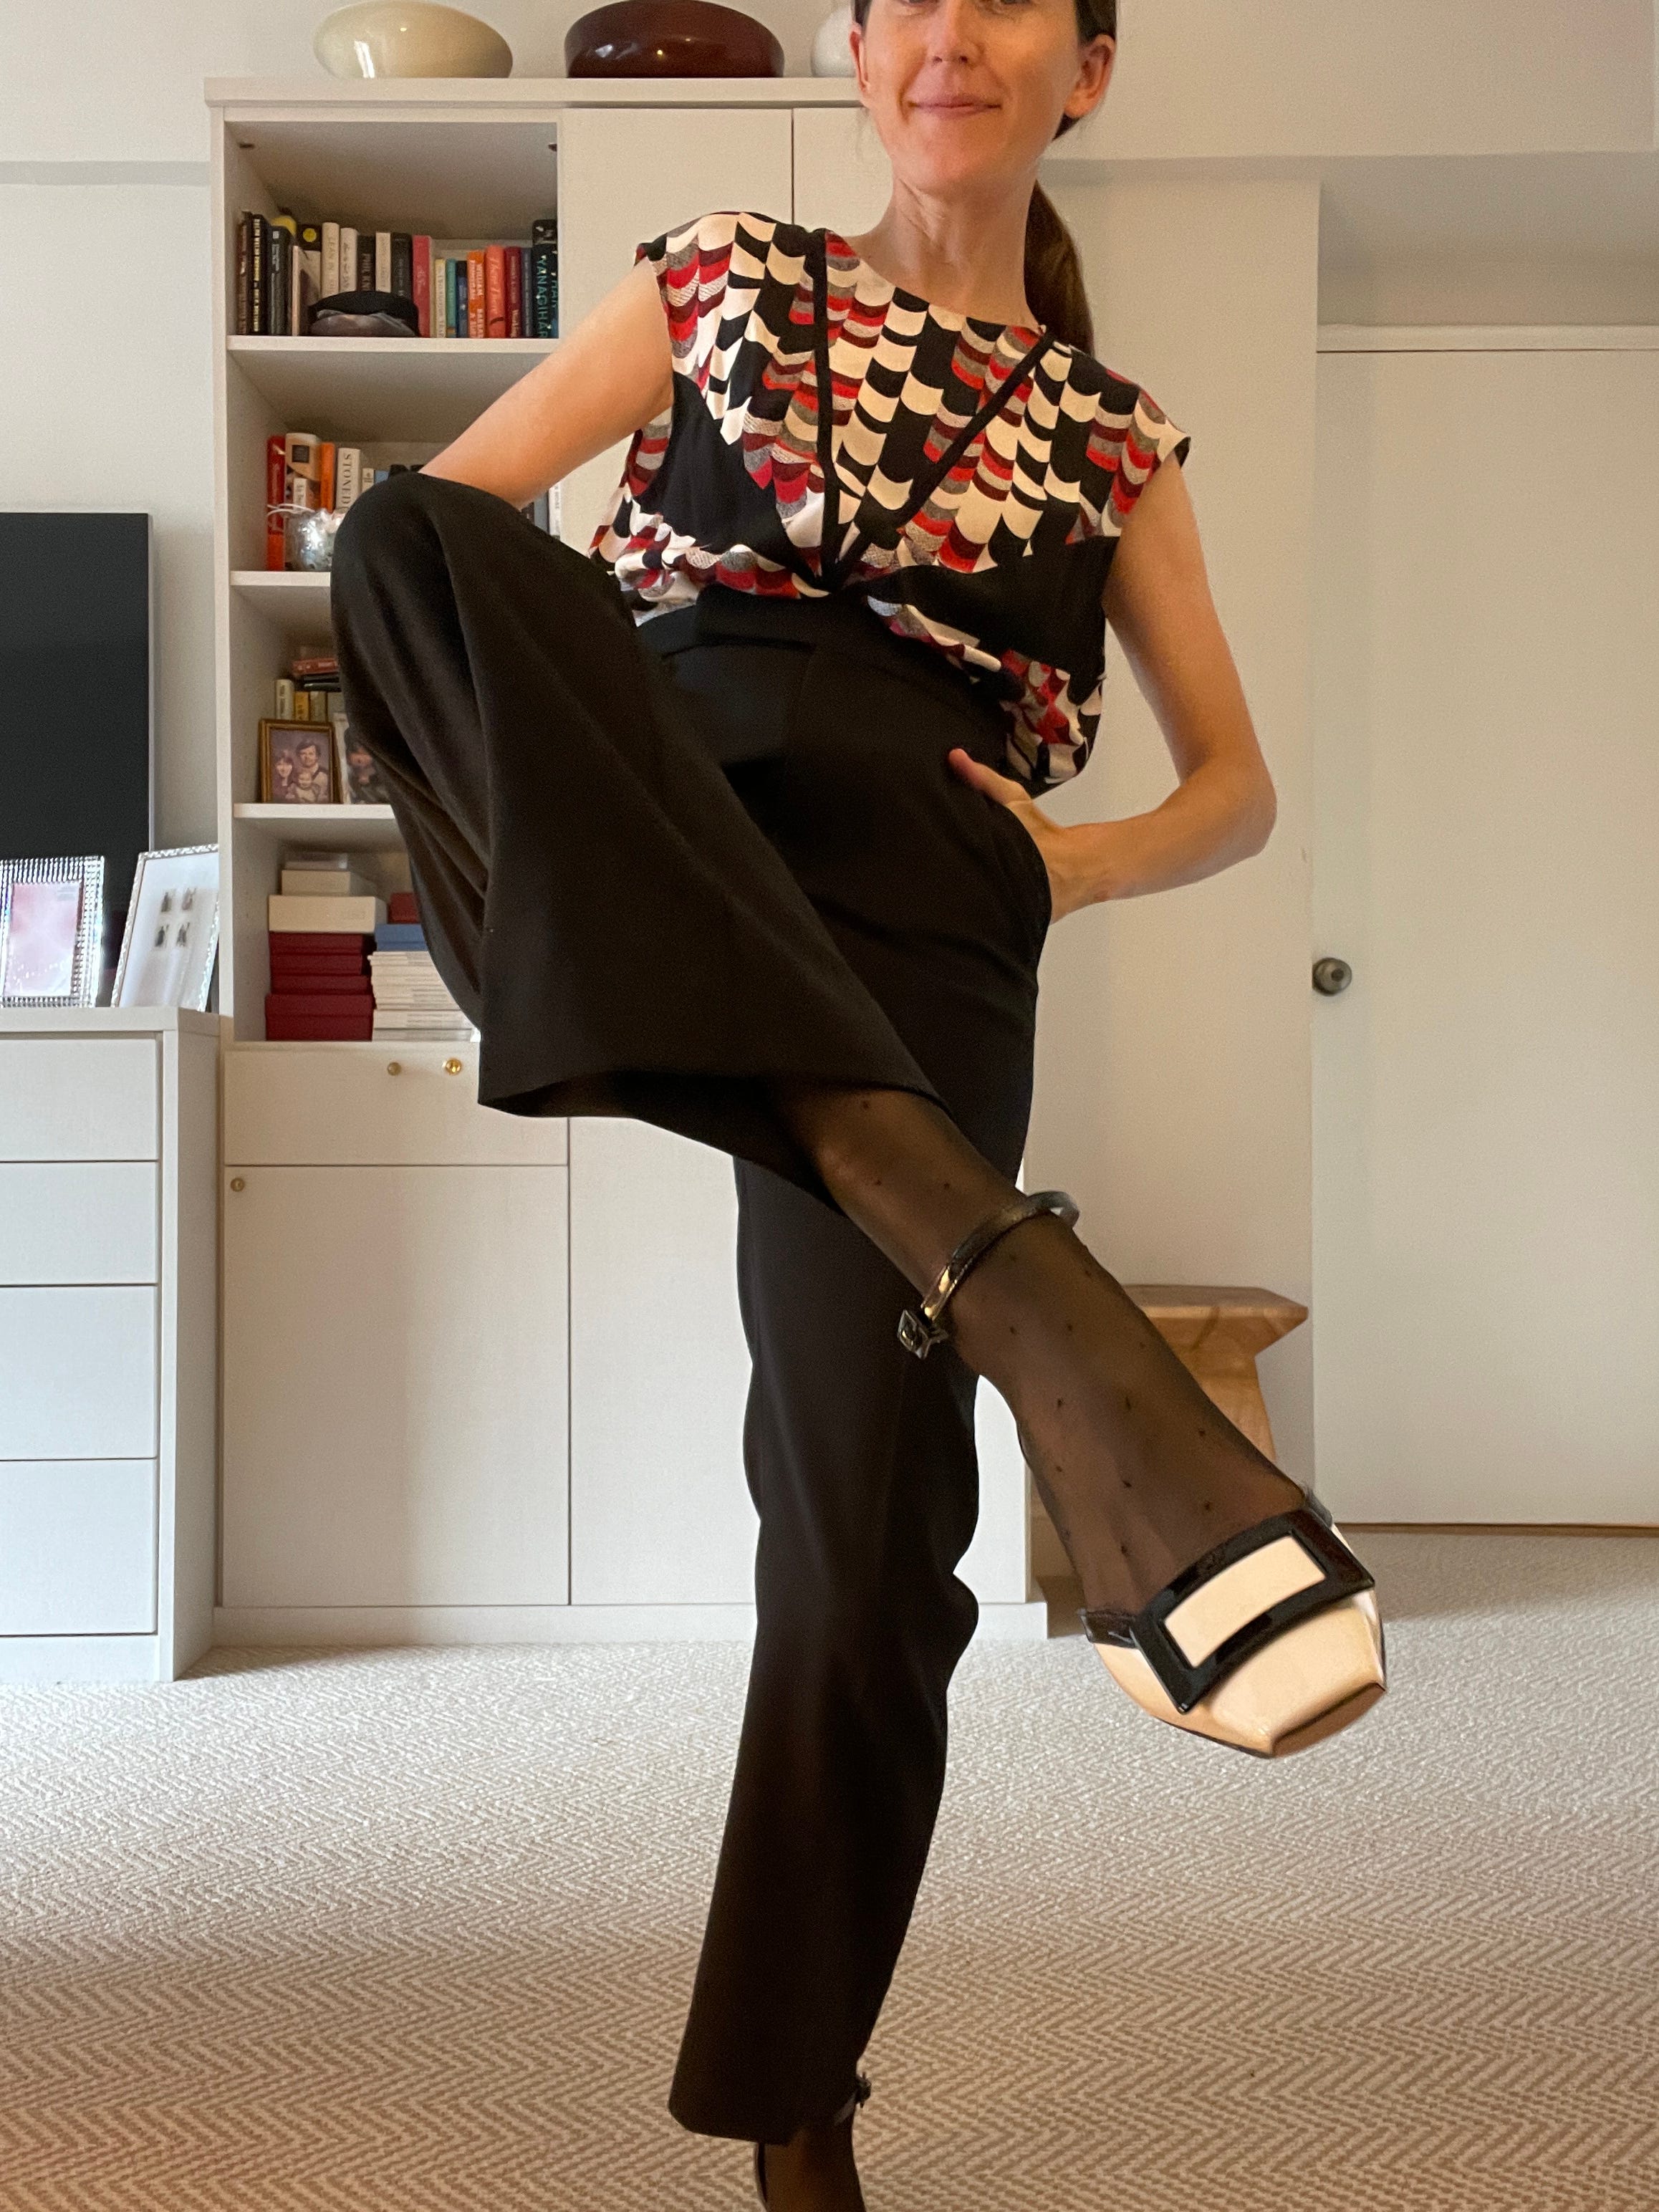 The Best Black Pants For Work - by Becky Malinsky